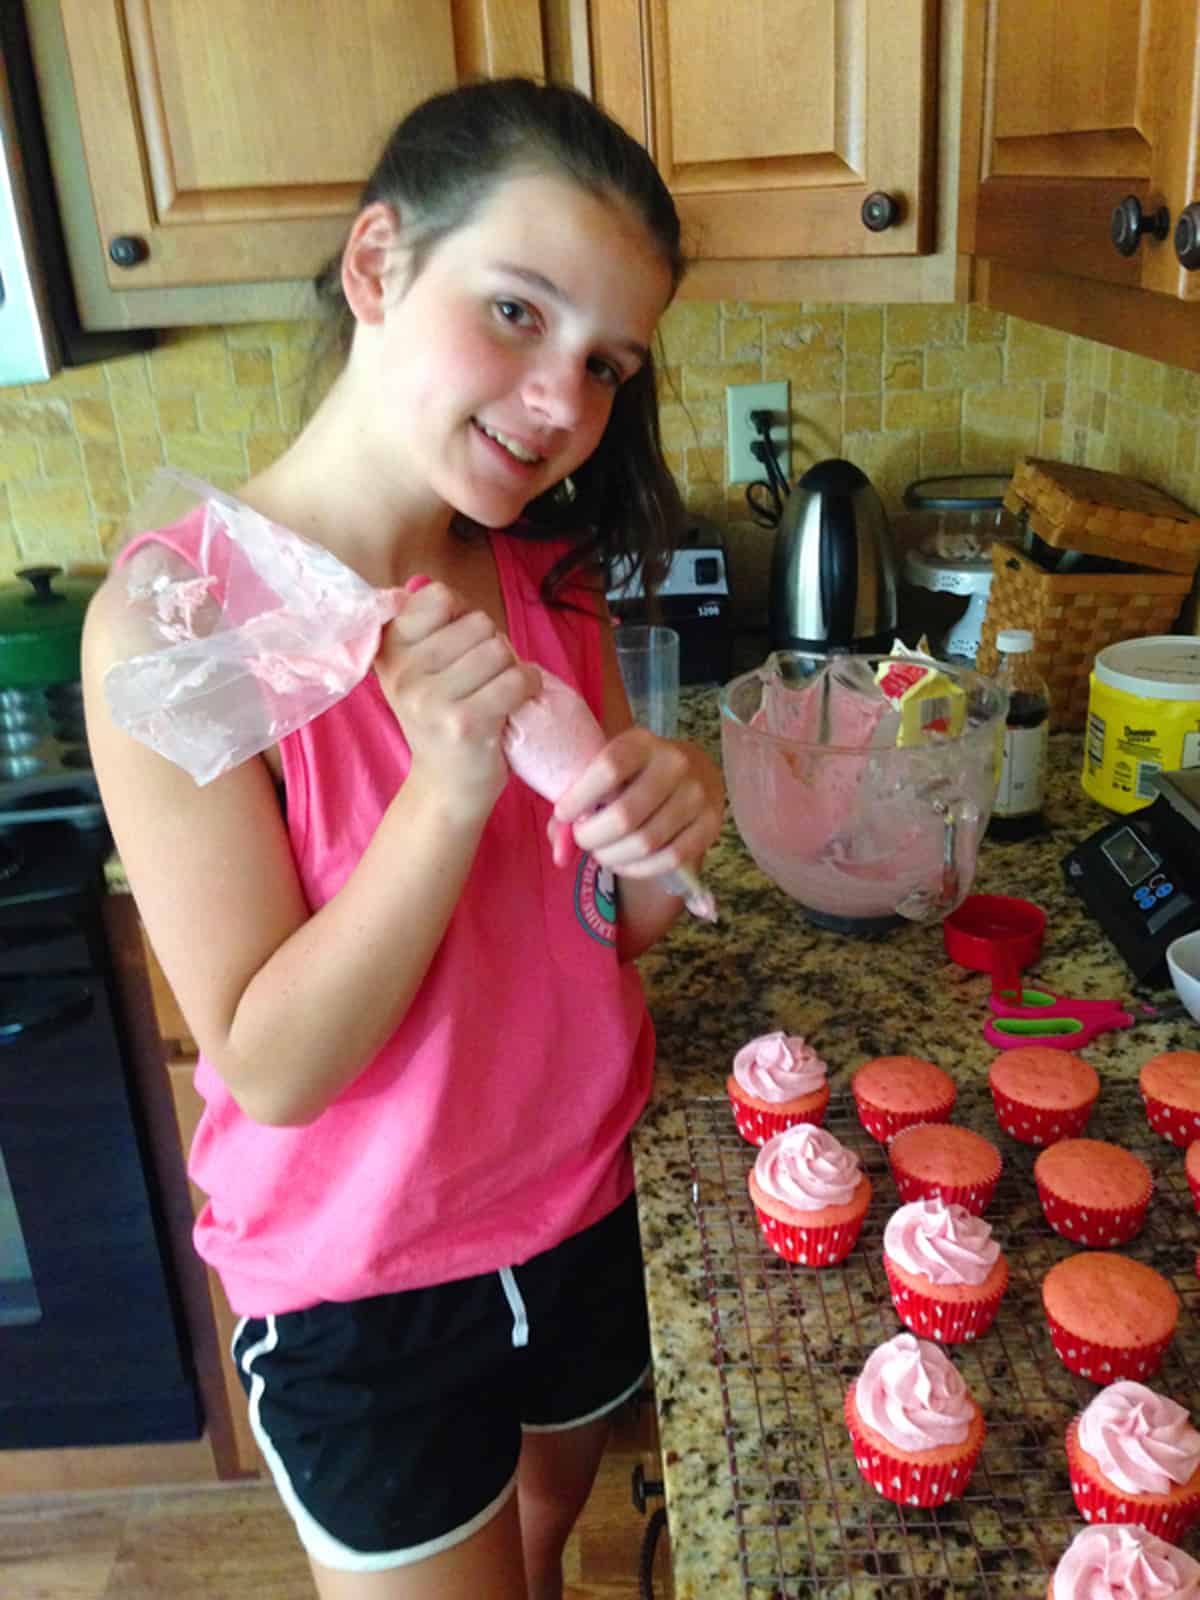 Girl decorating strawberry cupcakes in the kitchen.